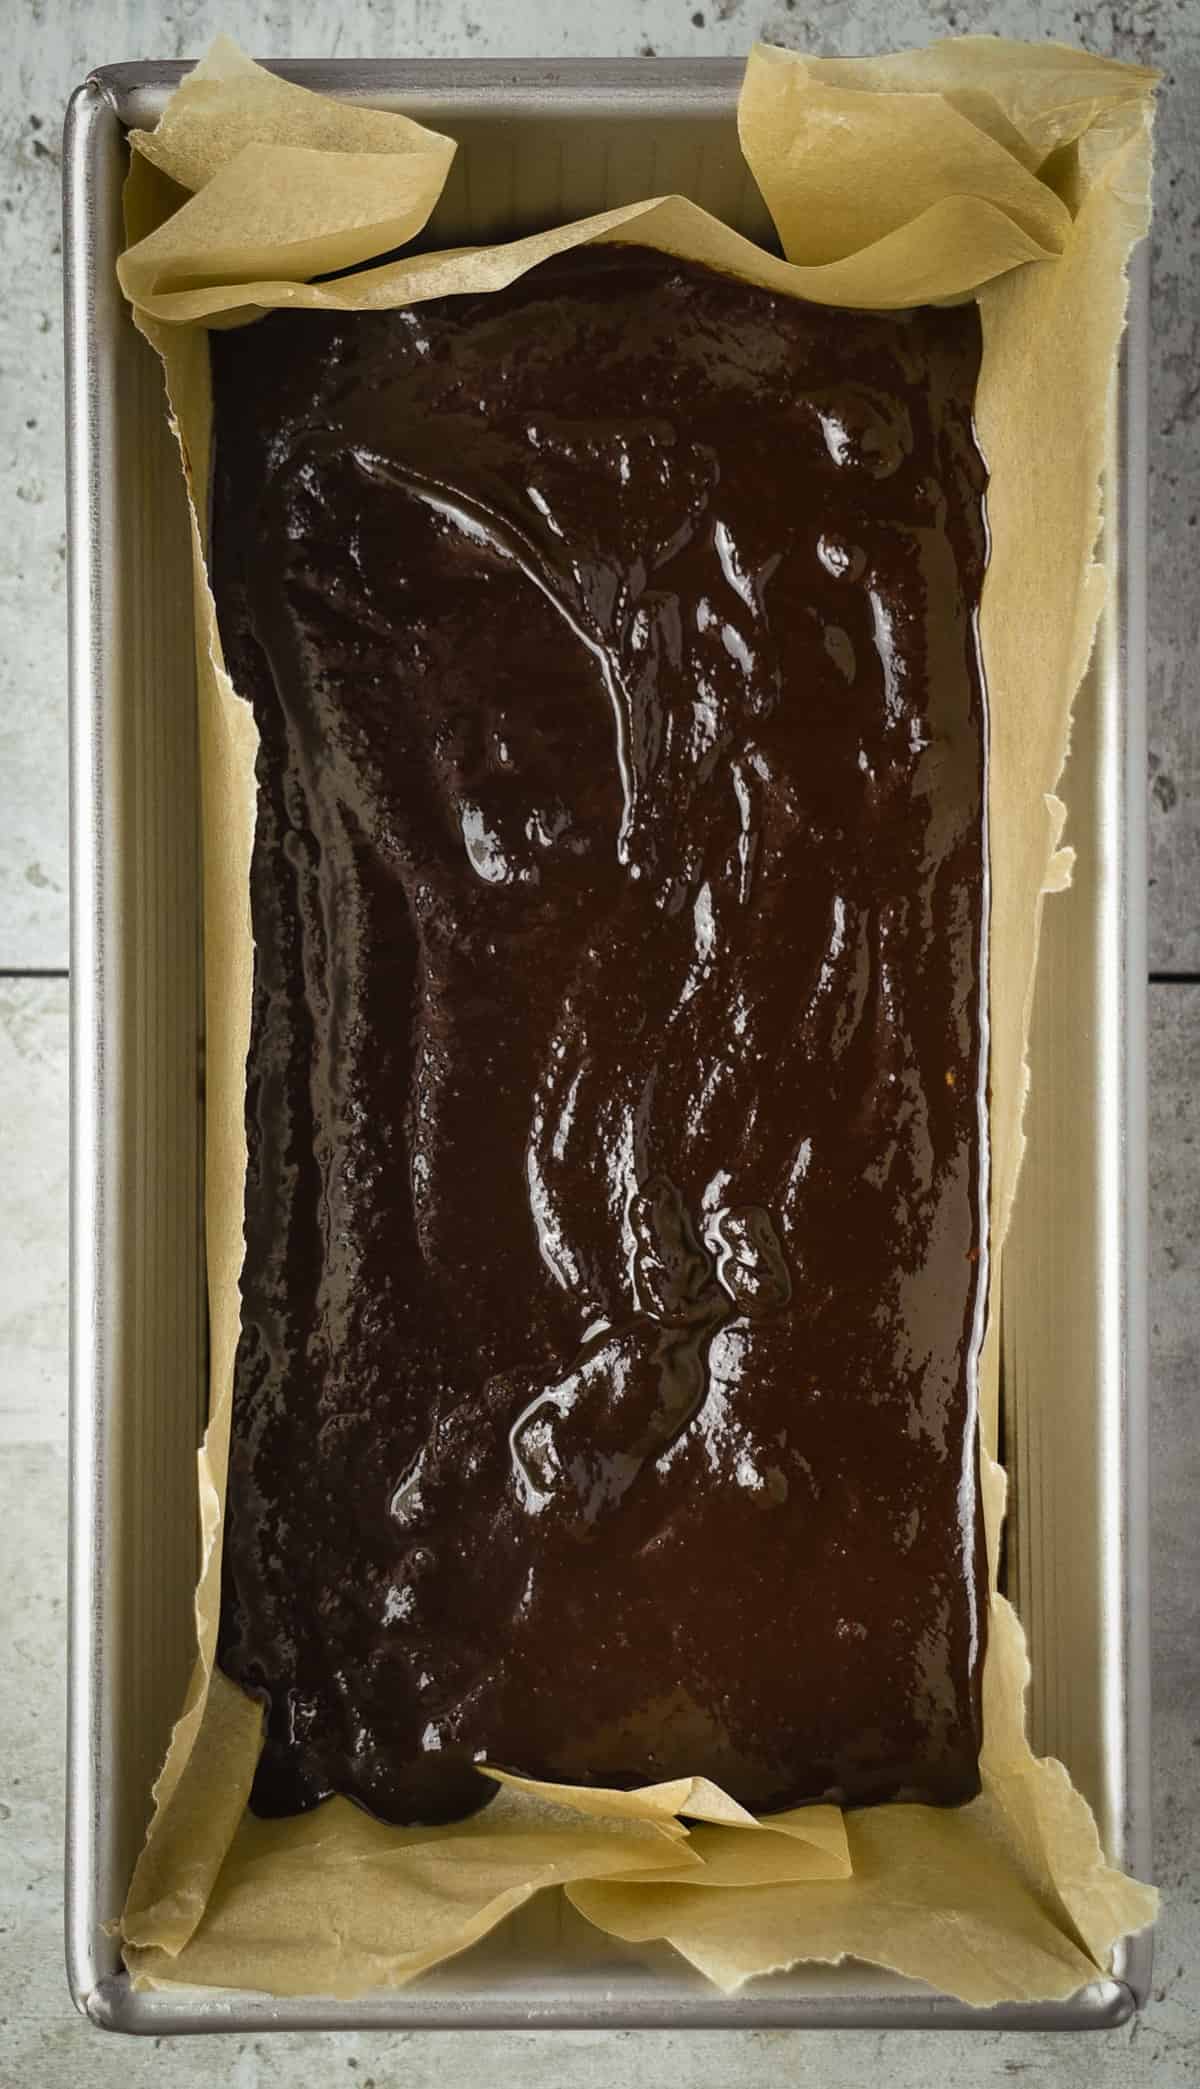 Melted fudge ingredients in loaf pan lined with parchment paper.